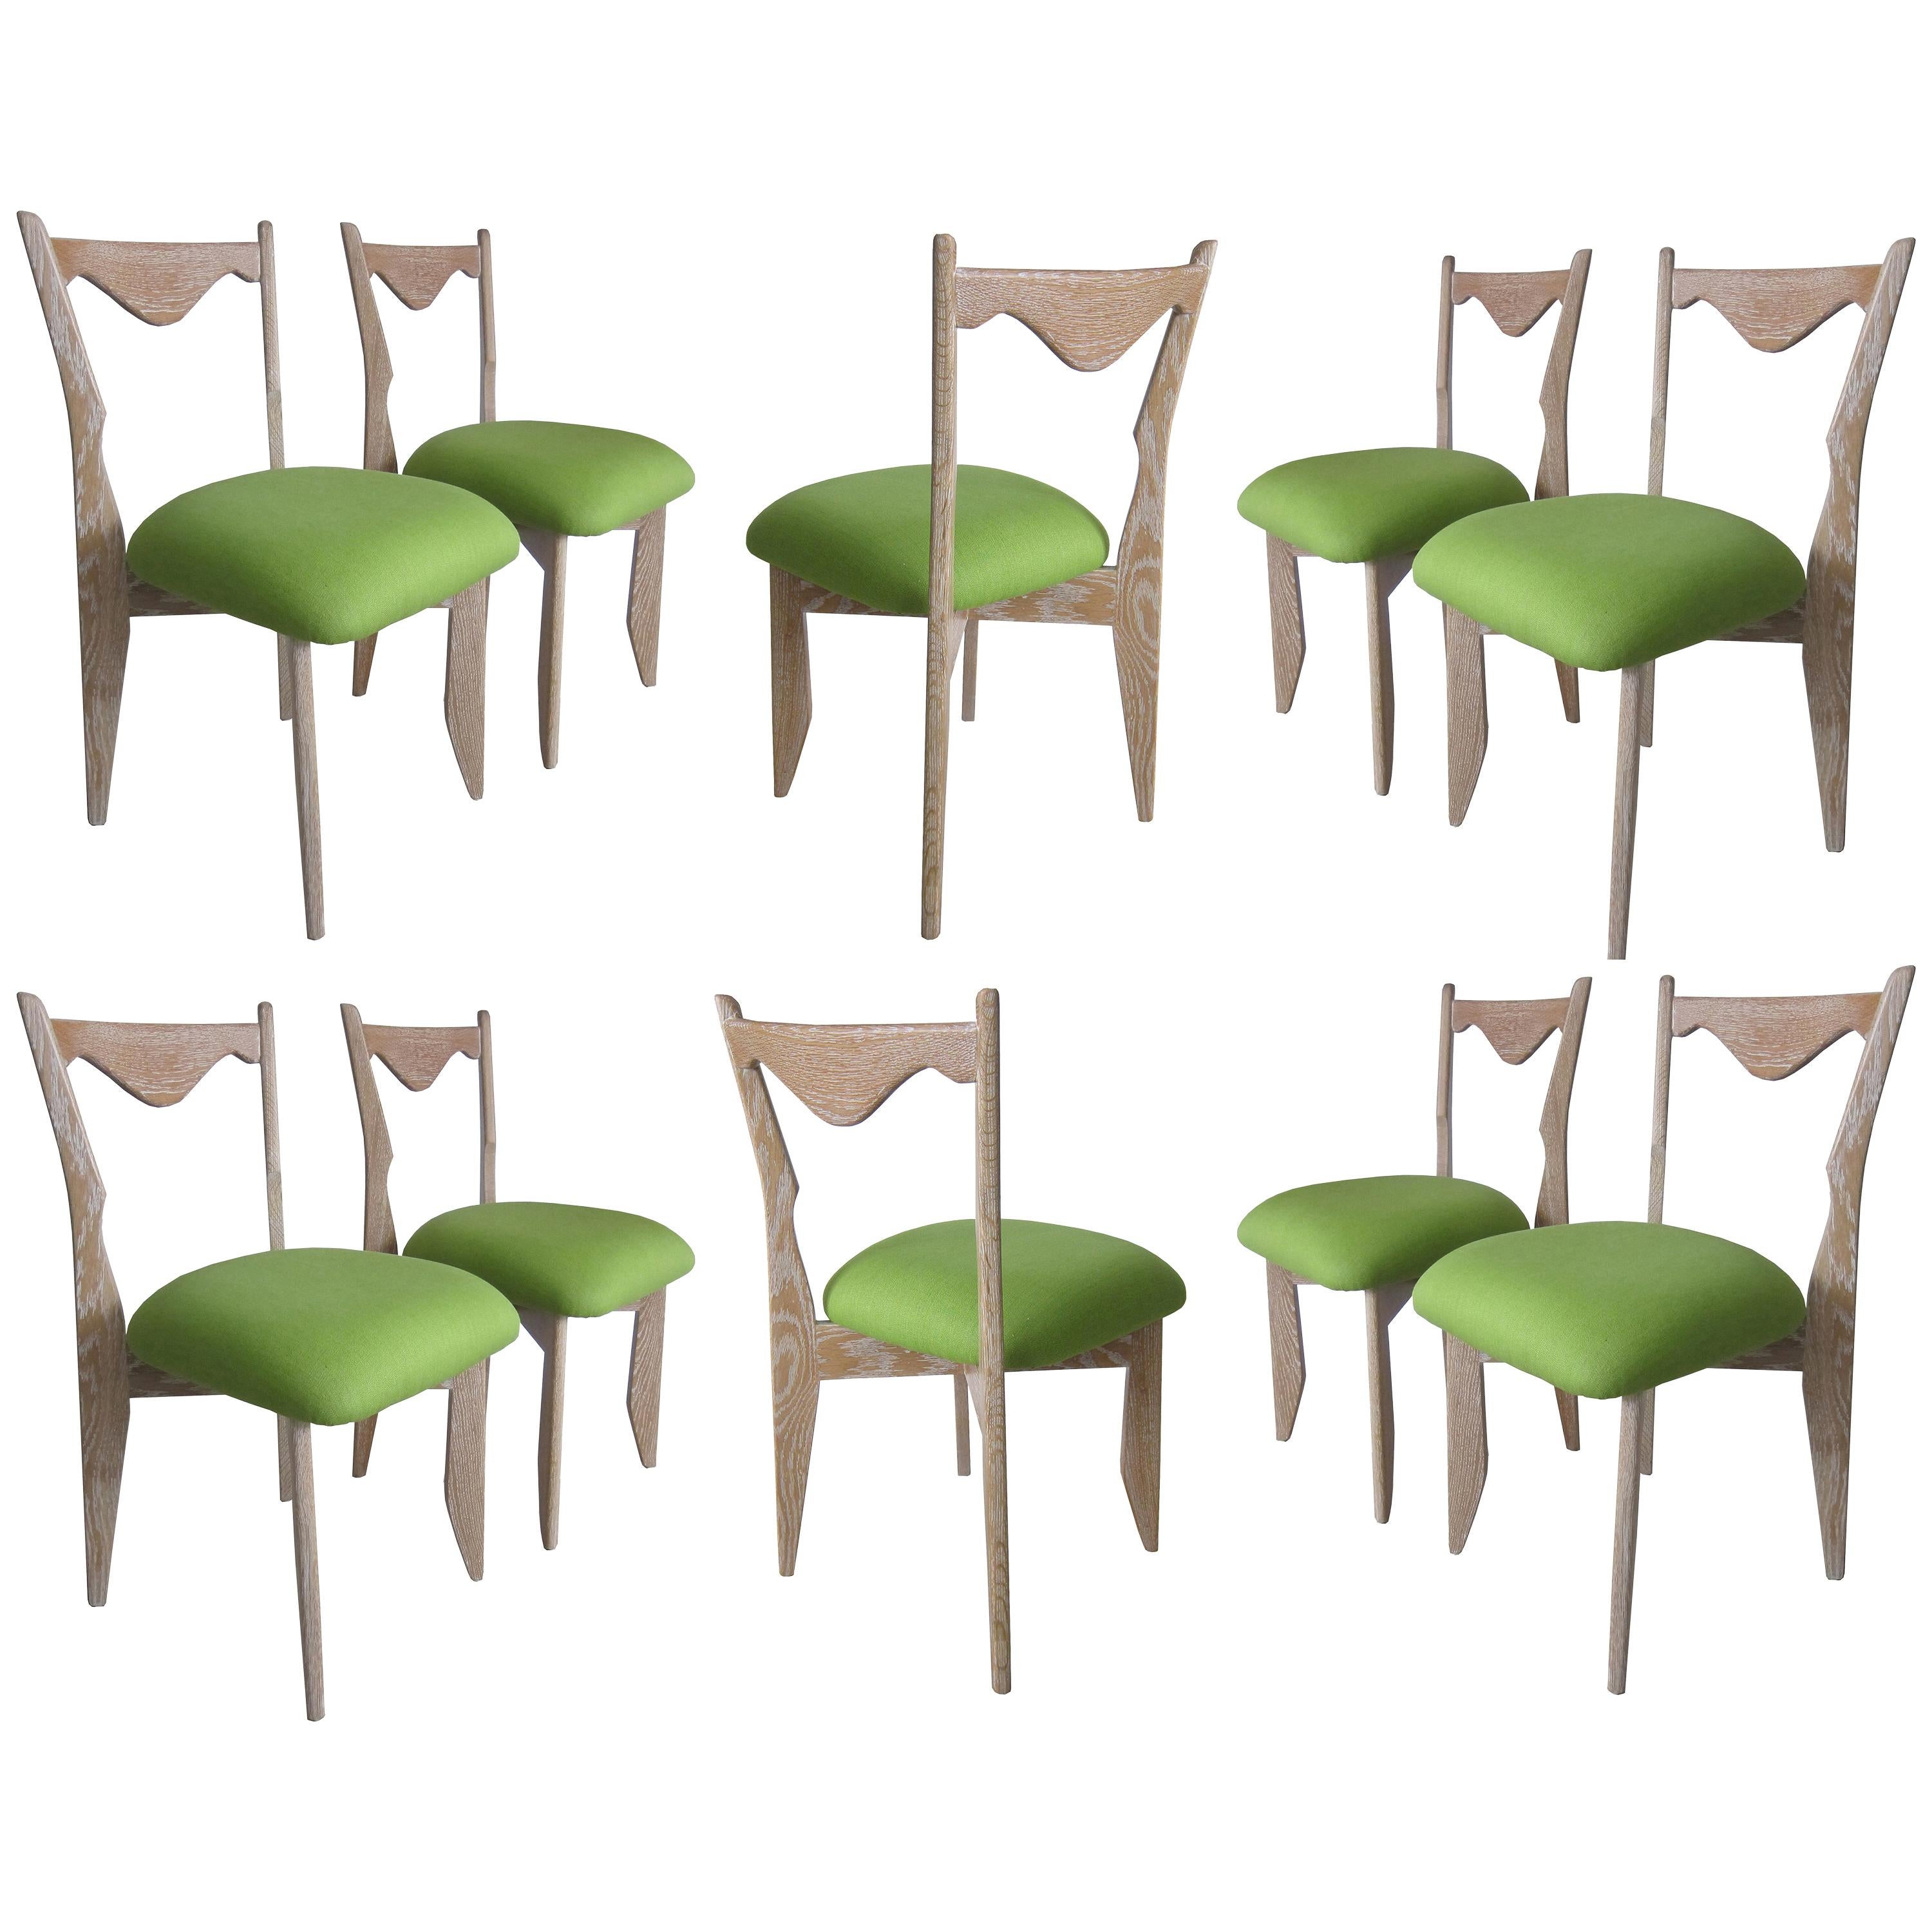 Ten Cerused Oak Dining Room Chairs by Guillerme & Chambron